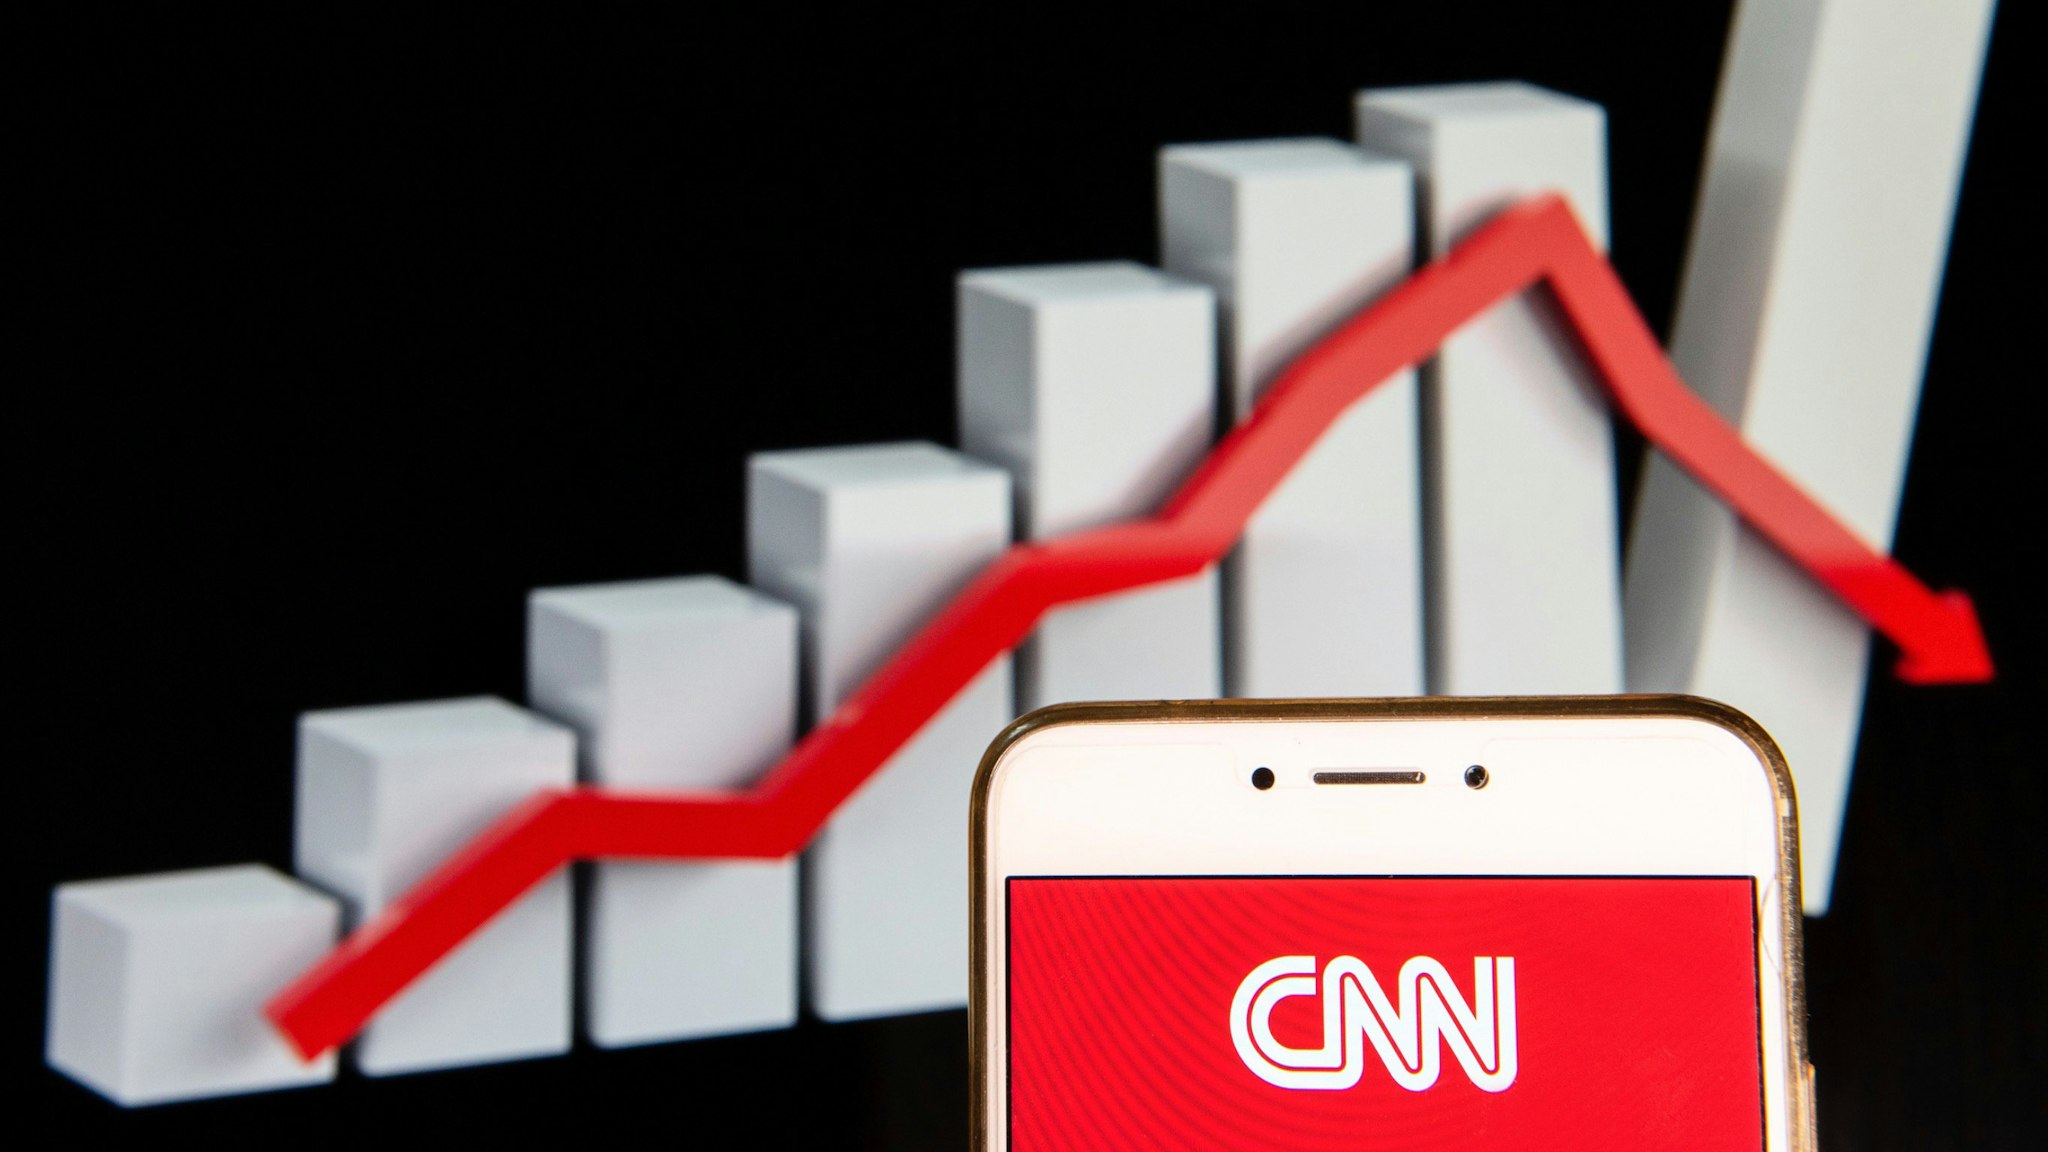 In this photo illustration, the CNN logo is seen displayed on an Android mobile device with a decline loses graph in the background.